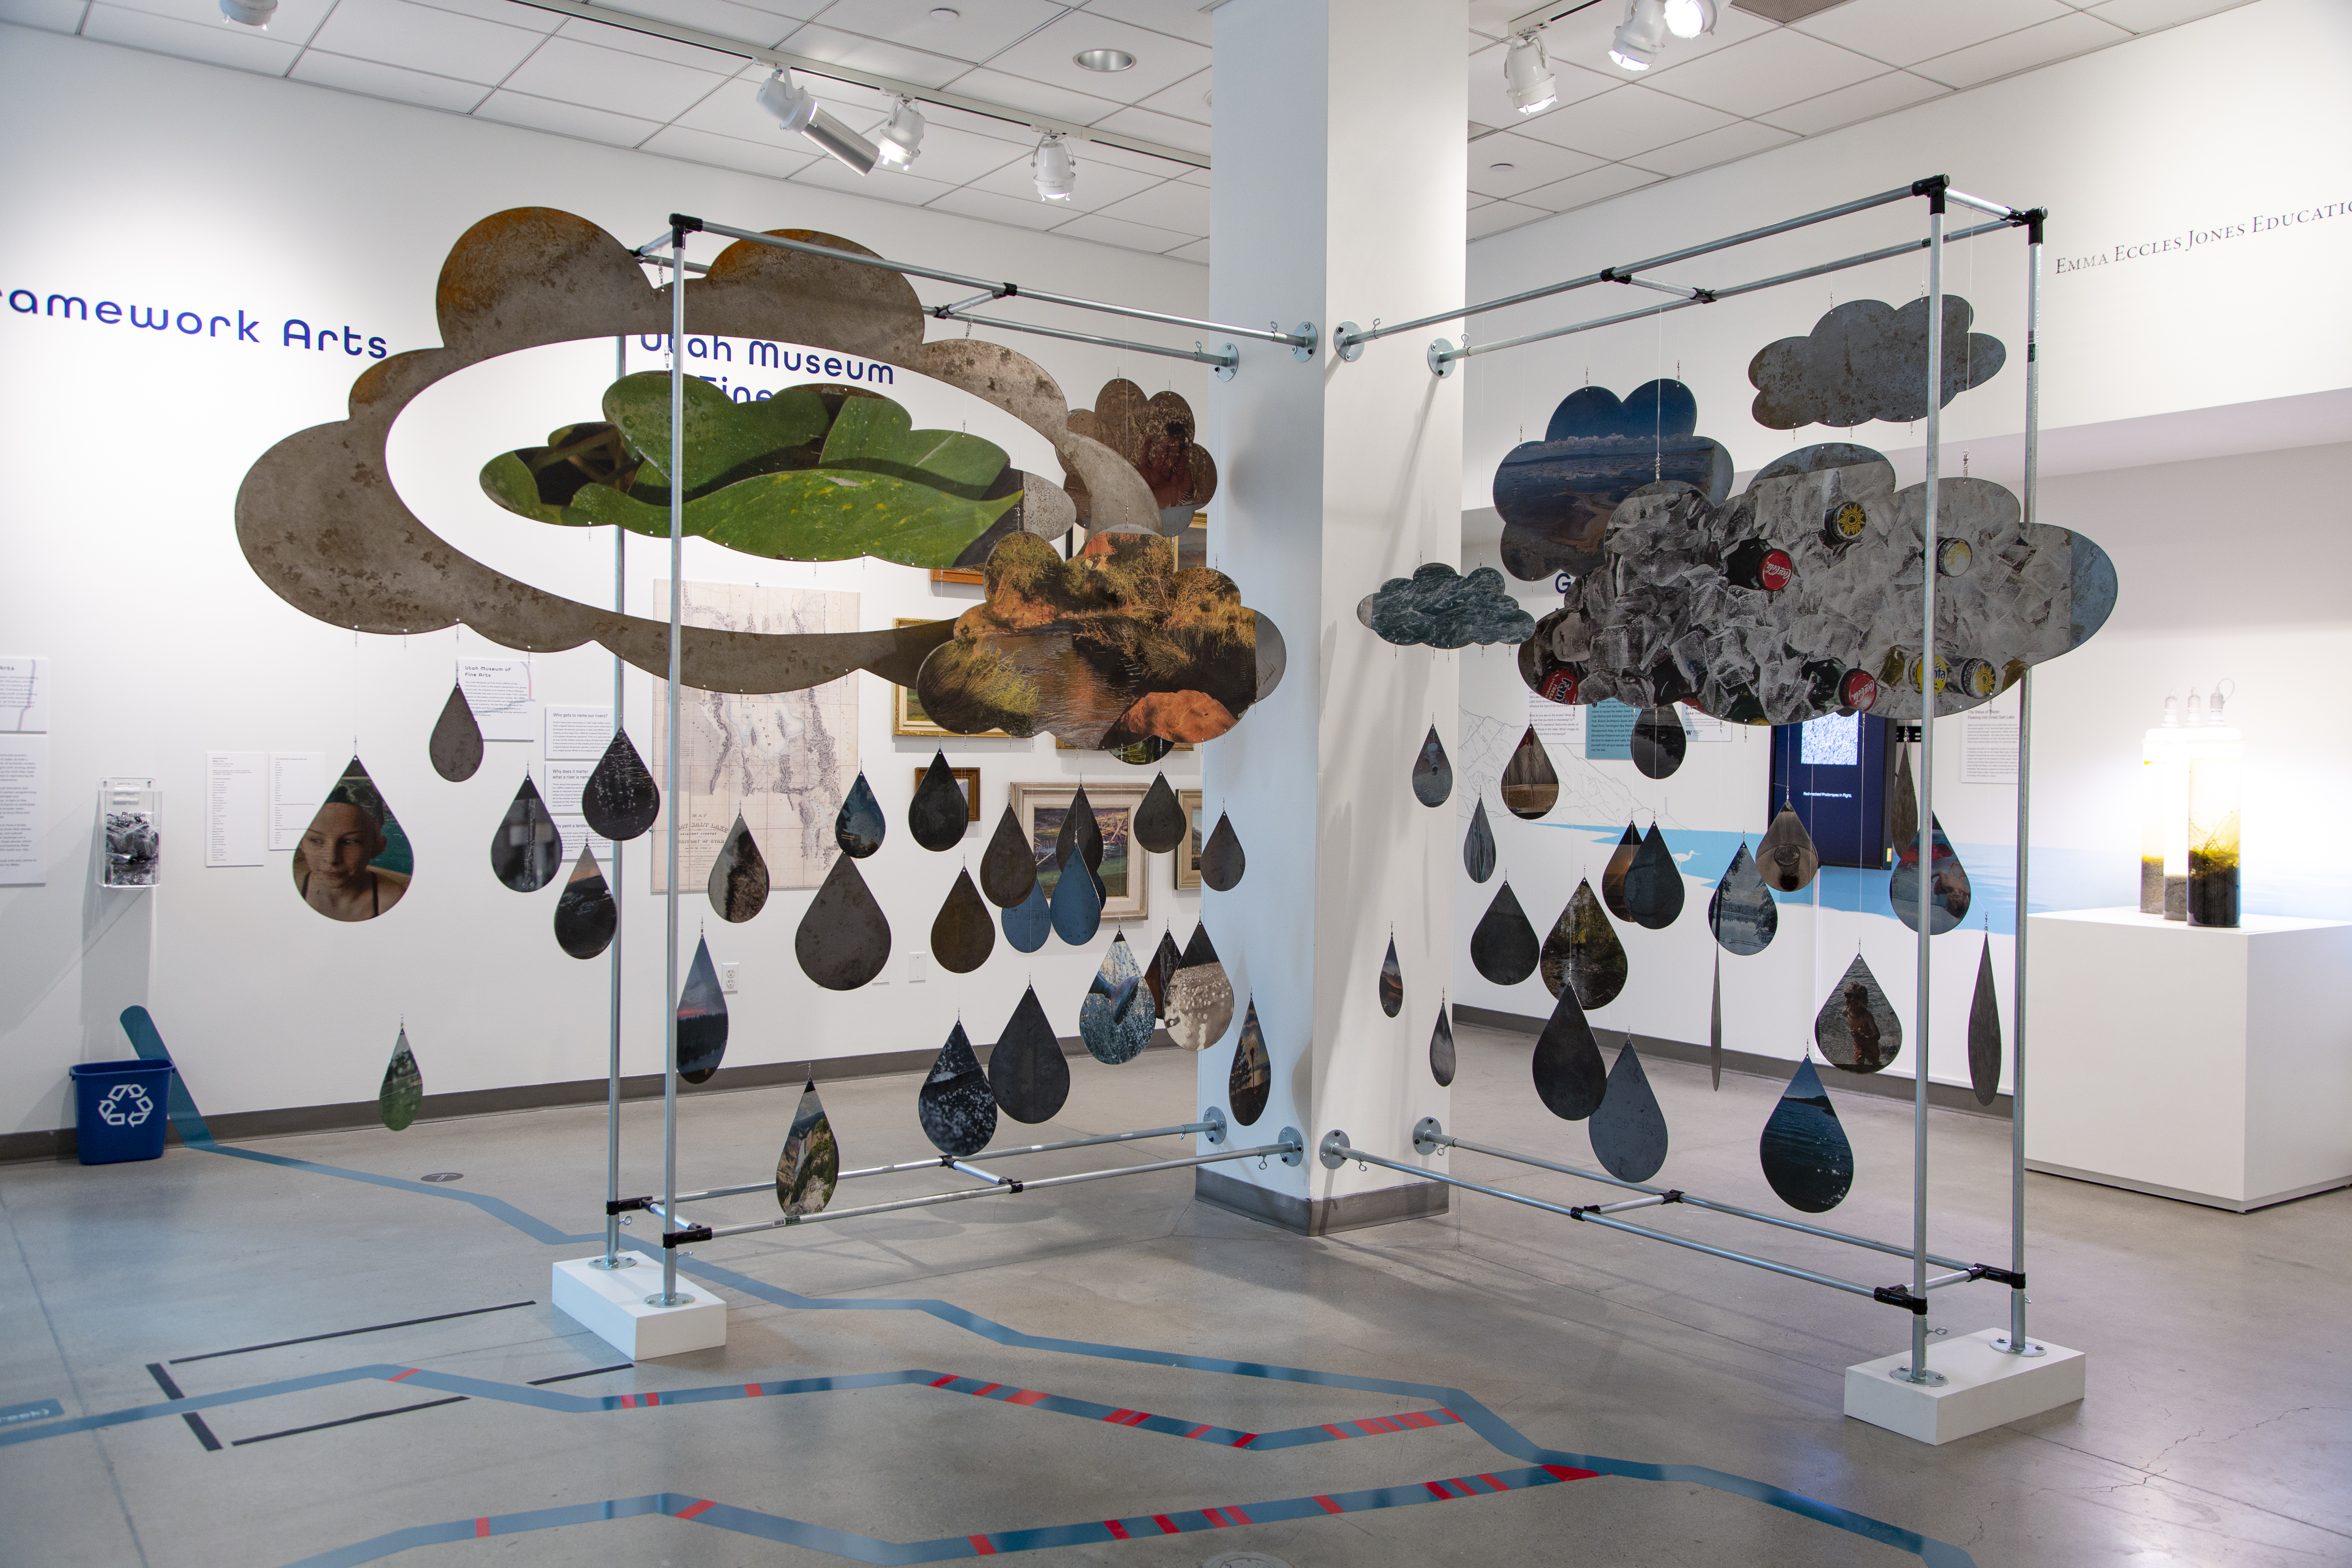 A hanging collage in the shape of clouds and water droplets at the UMFA.